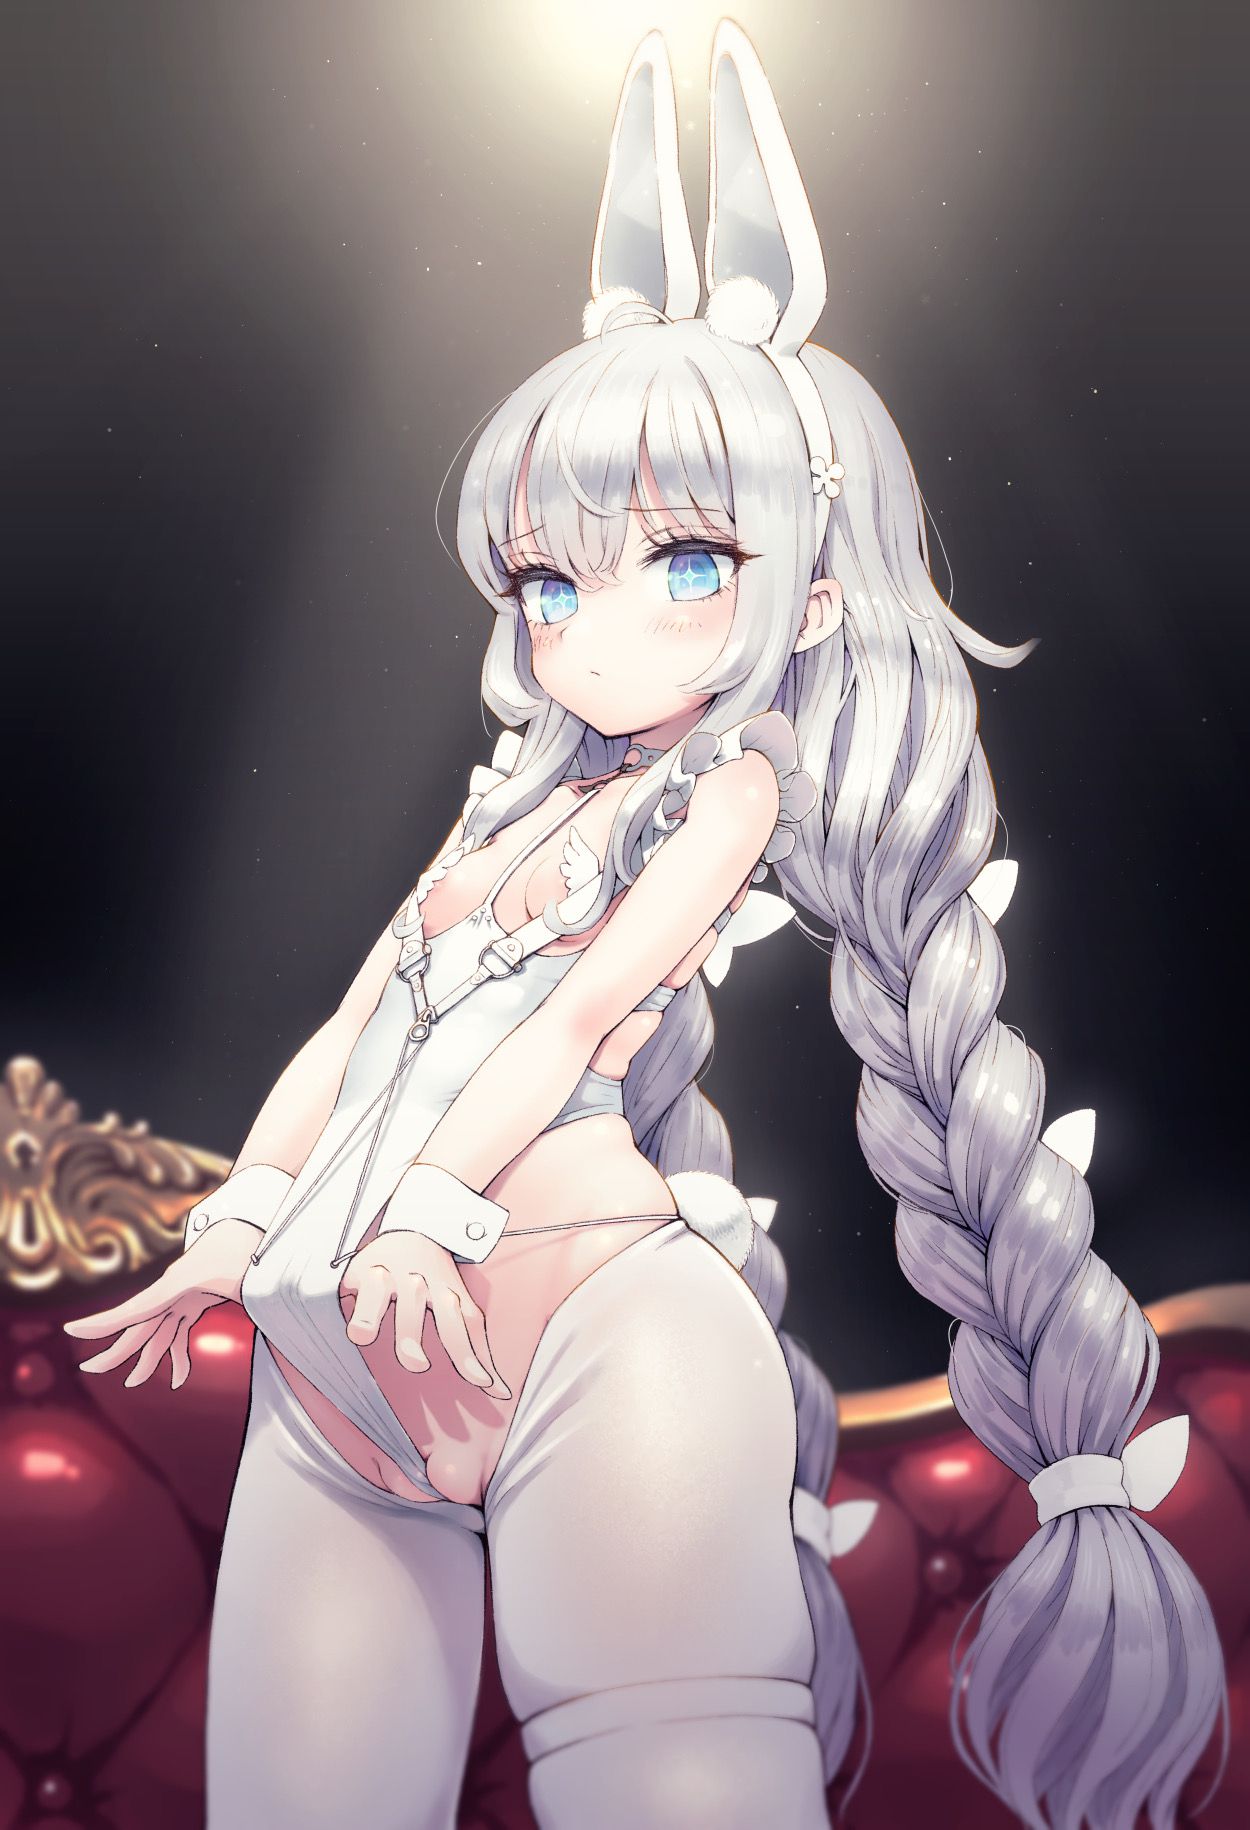 【Lori Bunny-chan】 Secondary erotic image that makes you want to see the moon with Usagi chan in the rabbit ear bunny girl of the secondary loli girl 35